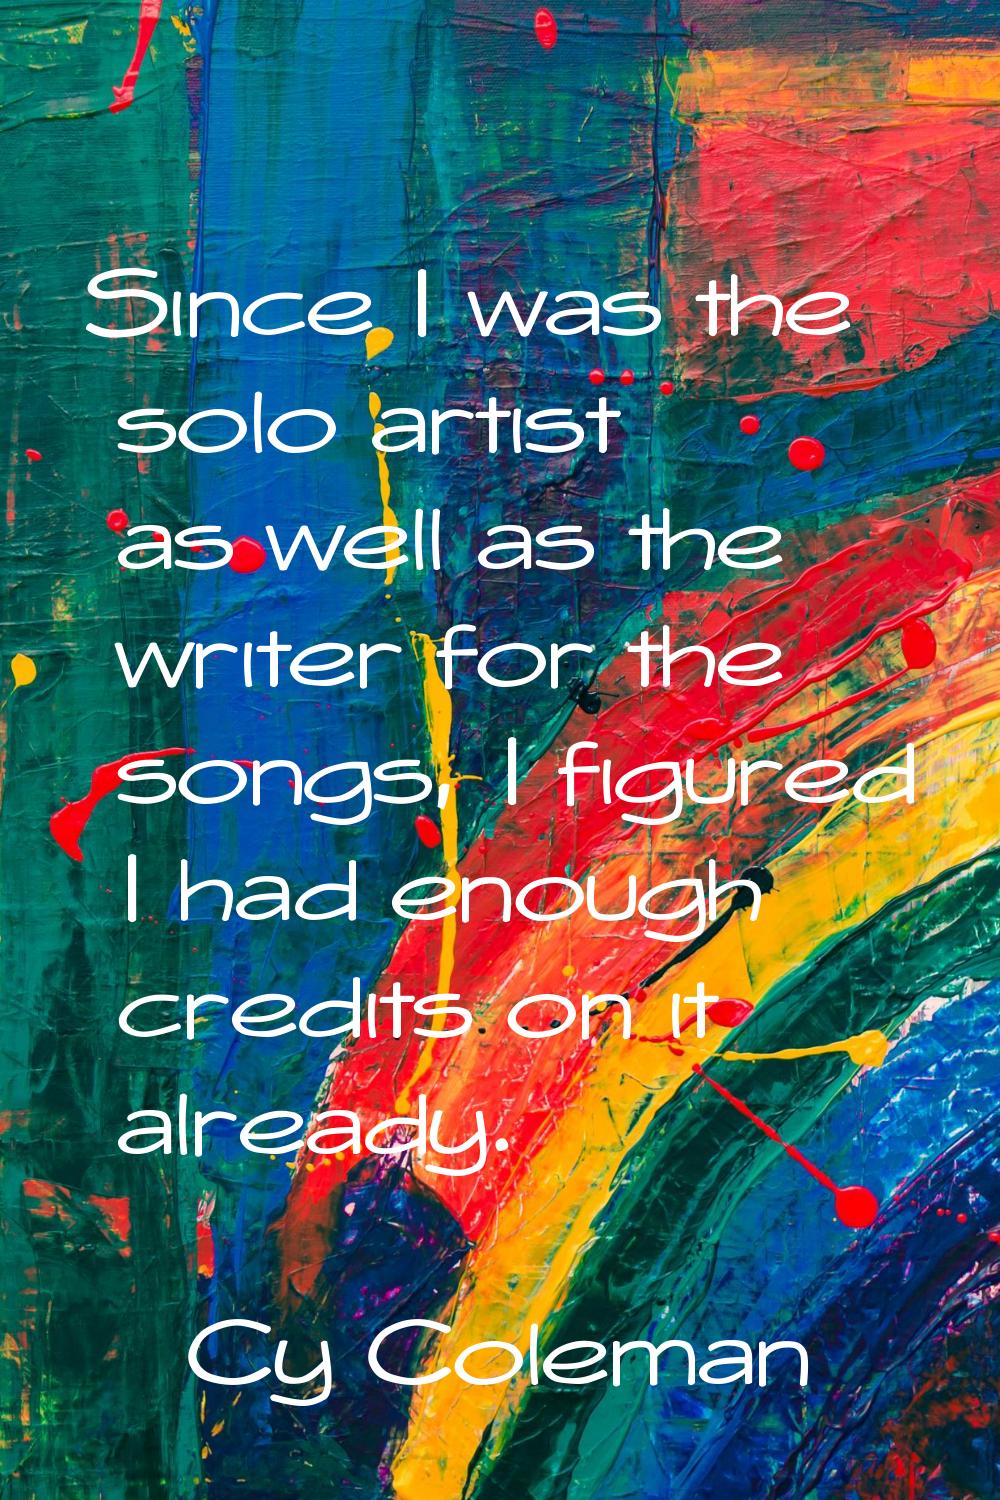 Since I was the solo artist as well as the writer for the songs, I figured I had enough credits on 